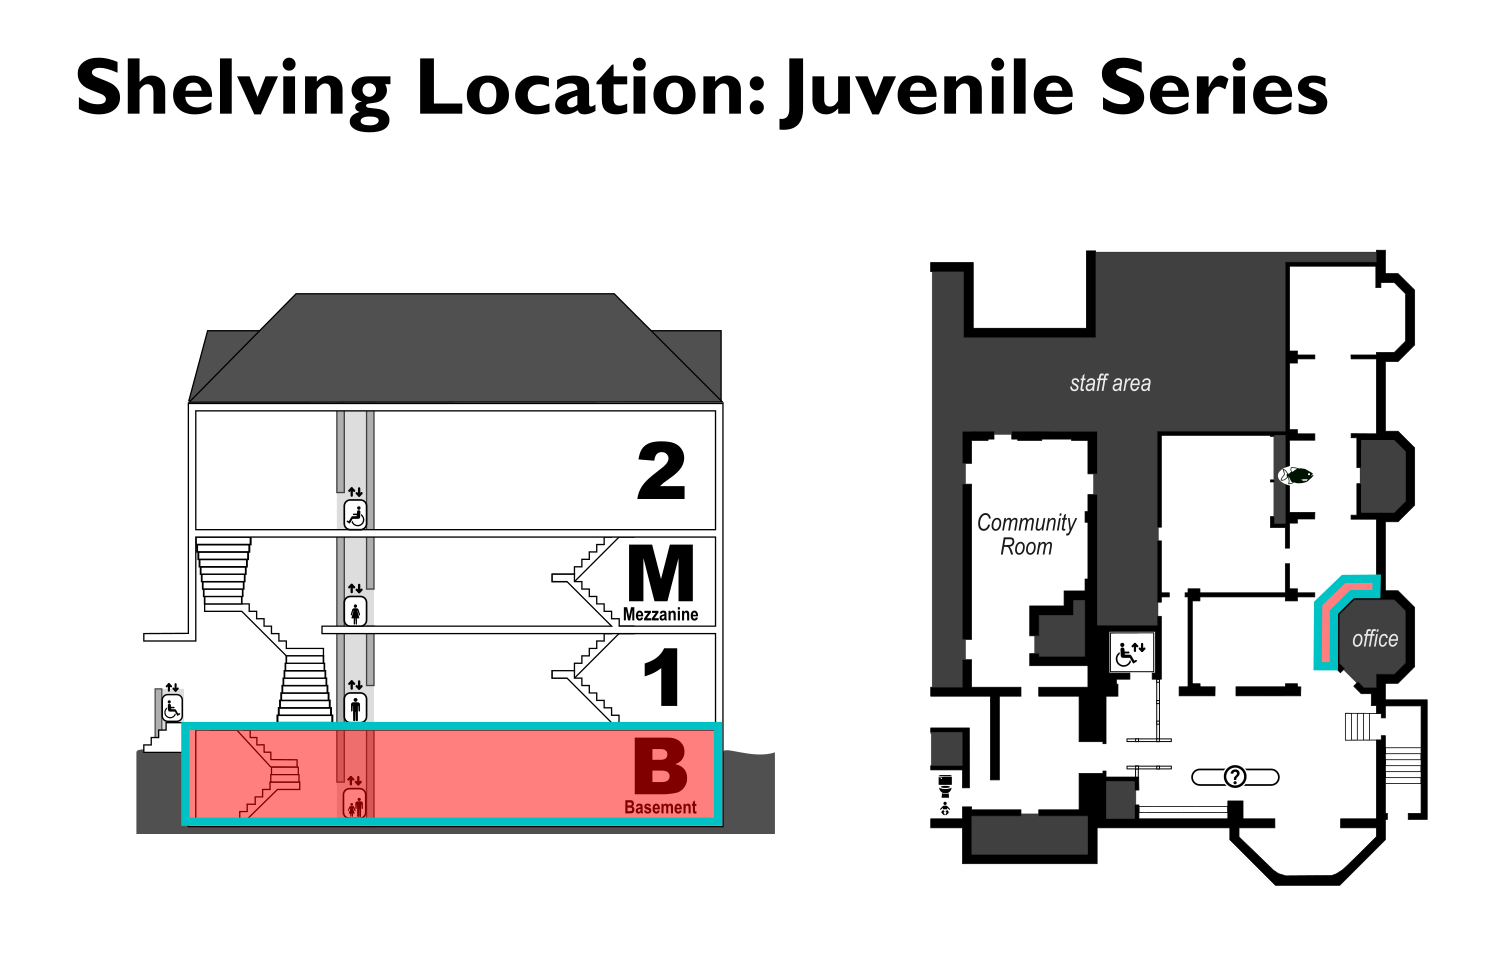 map showing location of the Juvenile Series shelving location